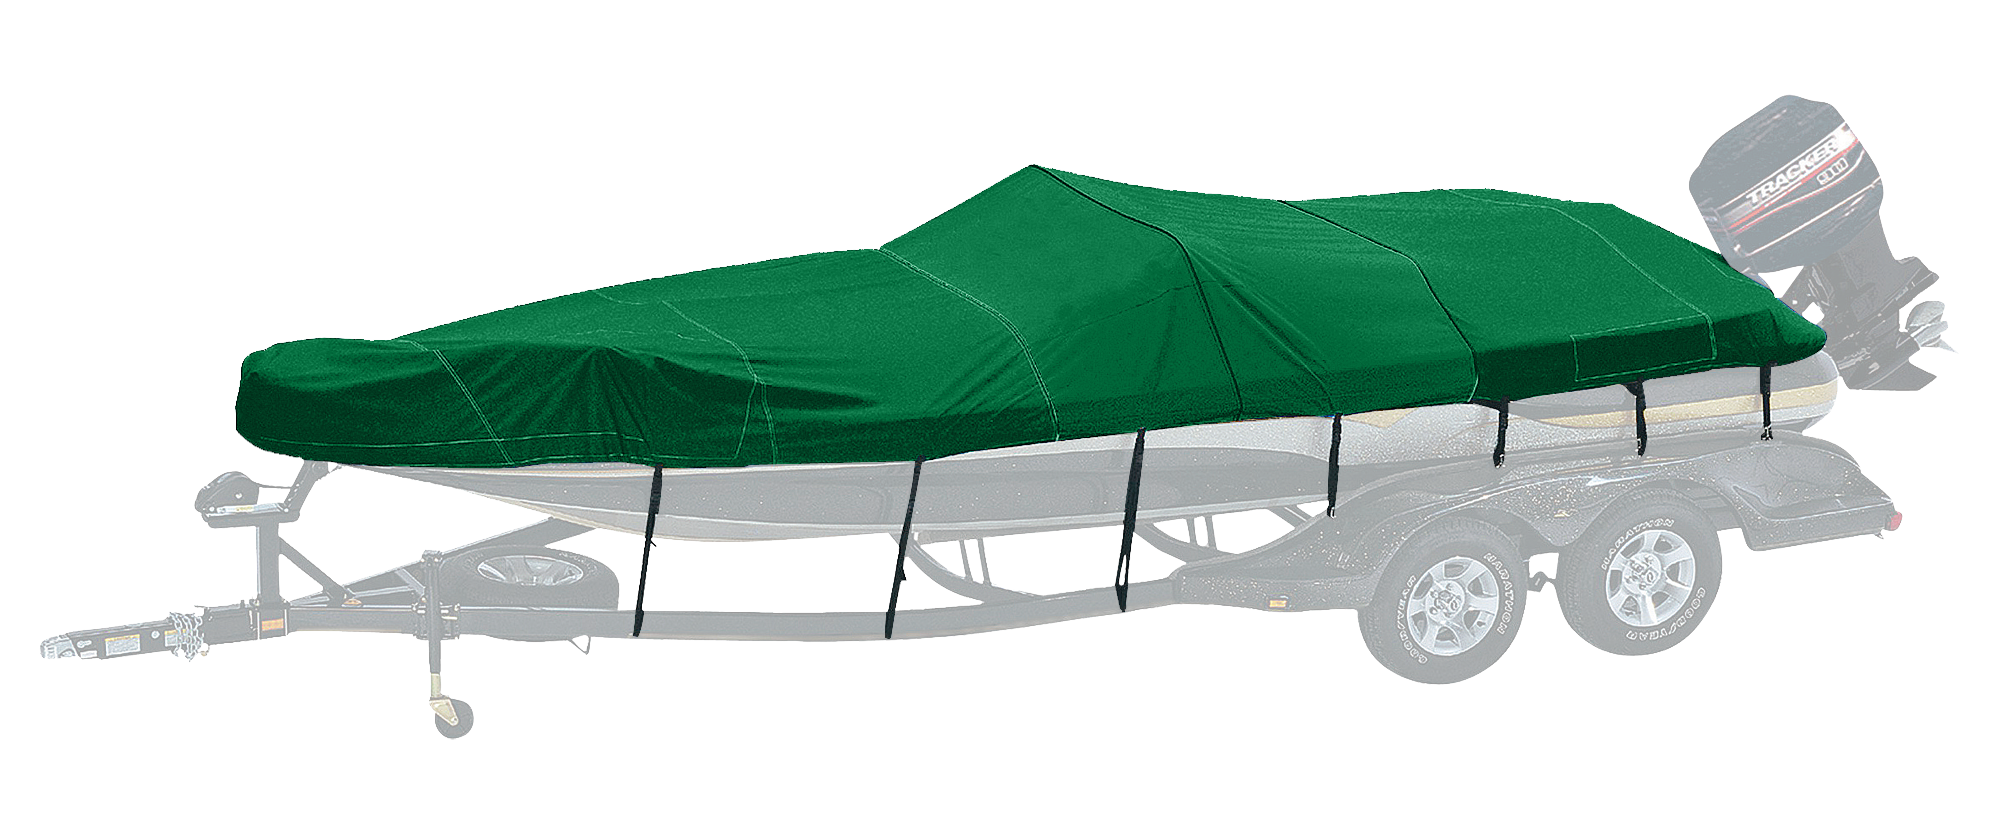 Bass Pro Shops Exact Fit Custom Boat Cover by Westland - Tracker Boats - 2002-2003 TX-17 SC - Forest Green